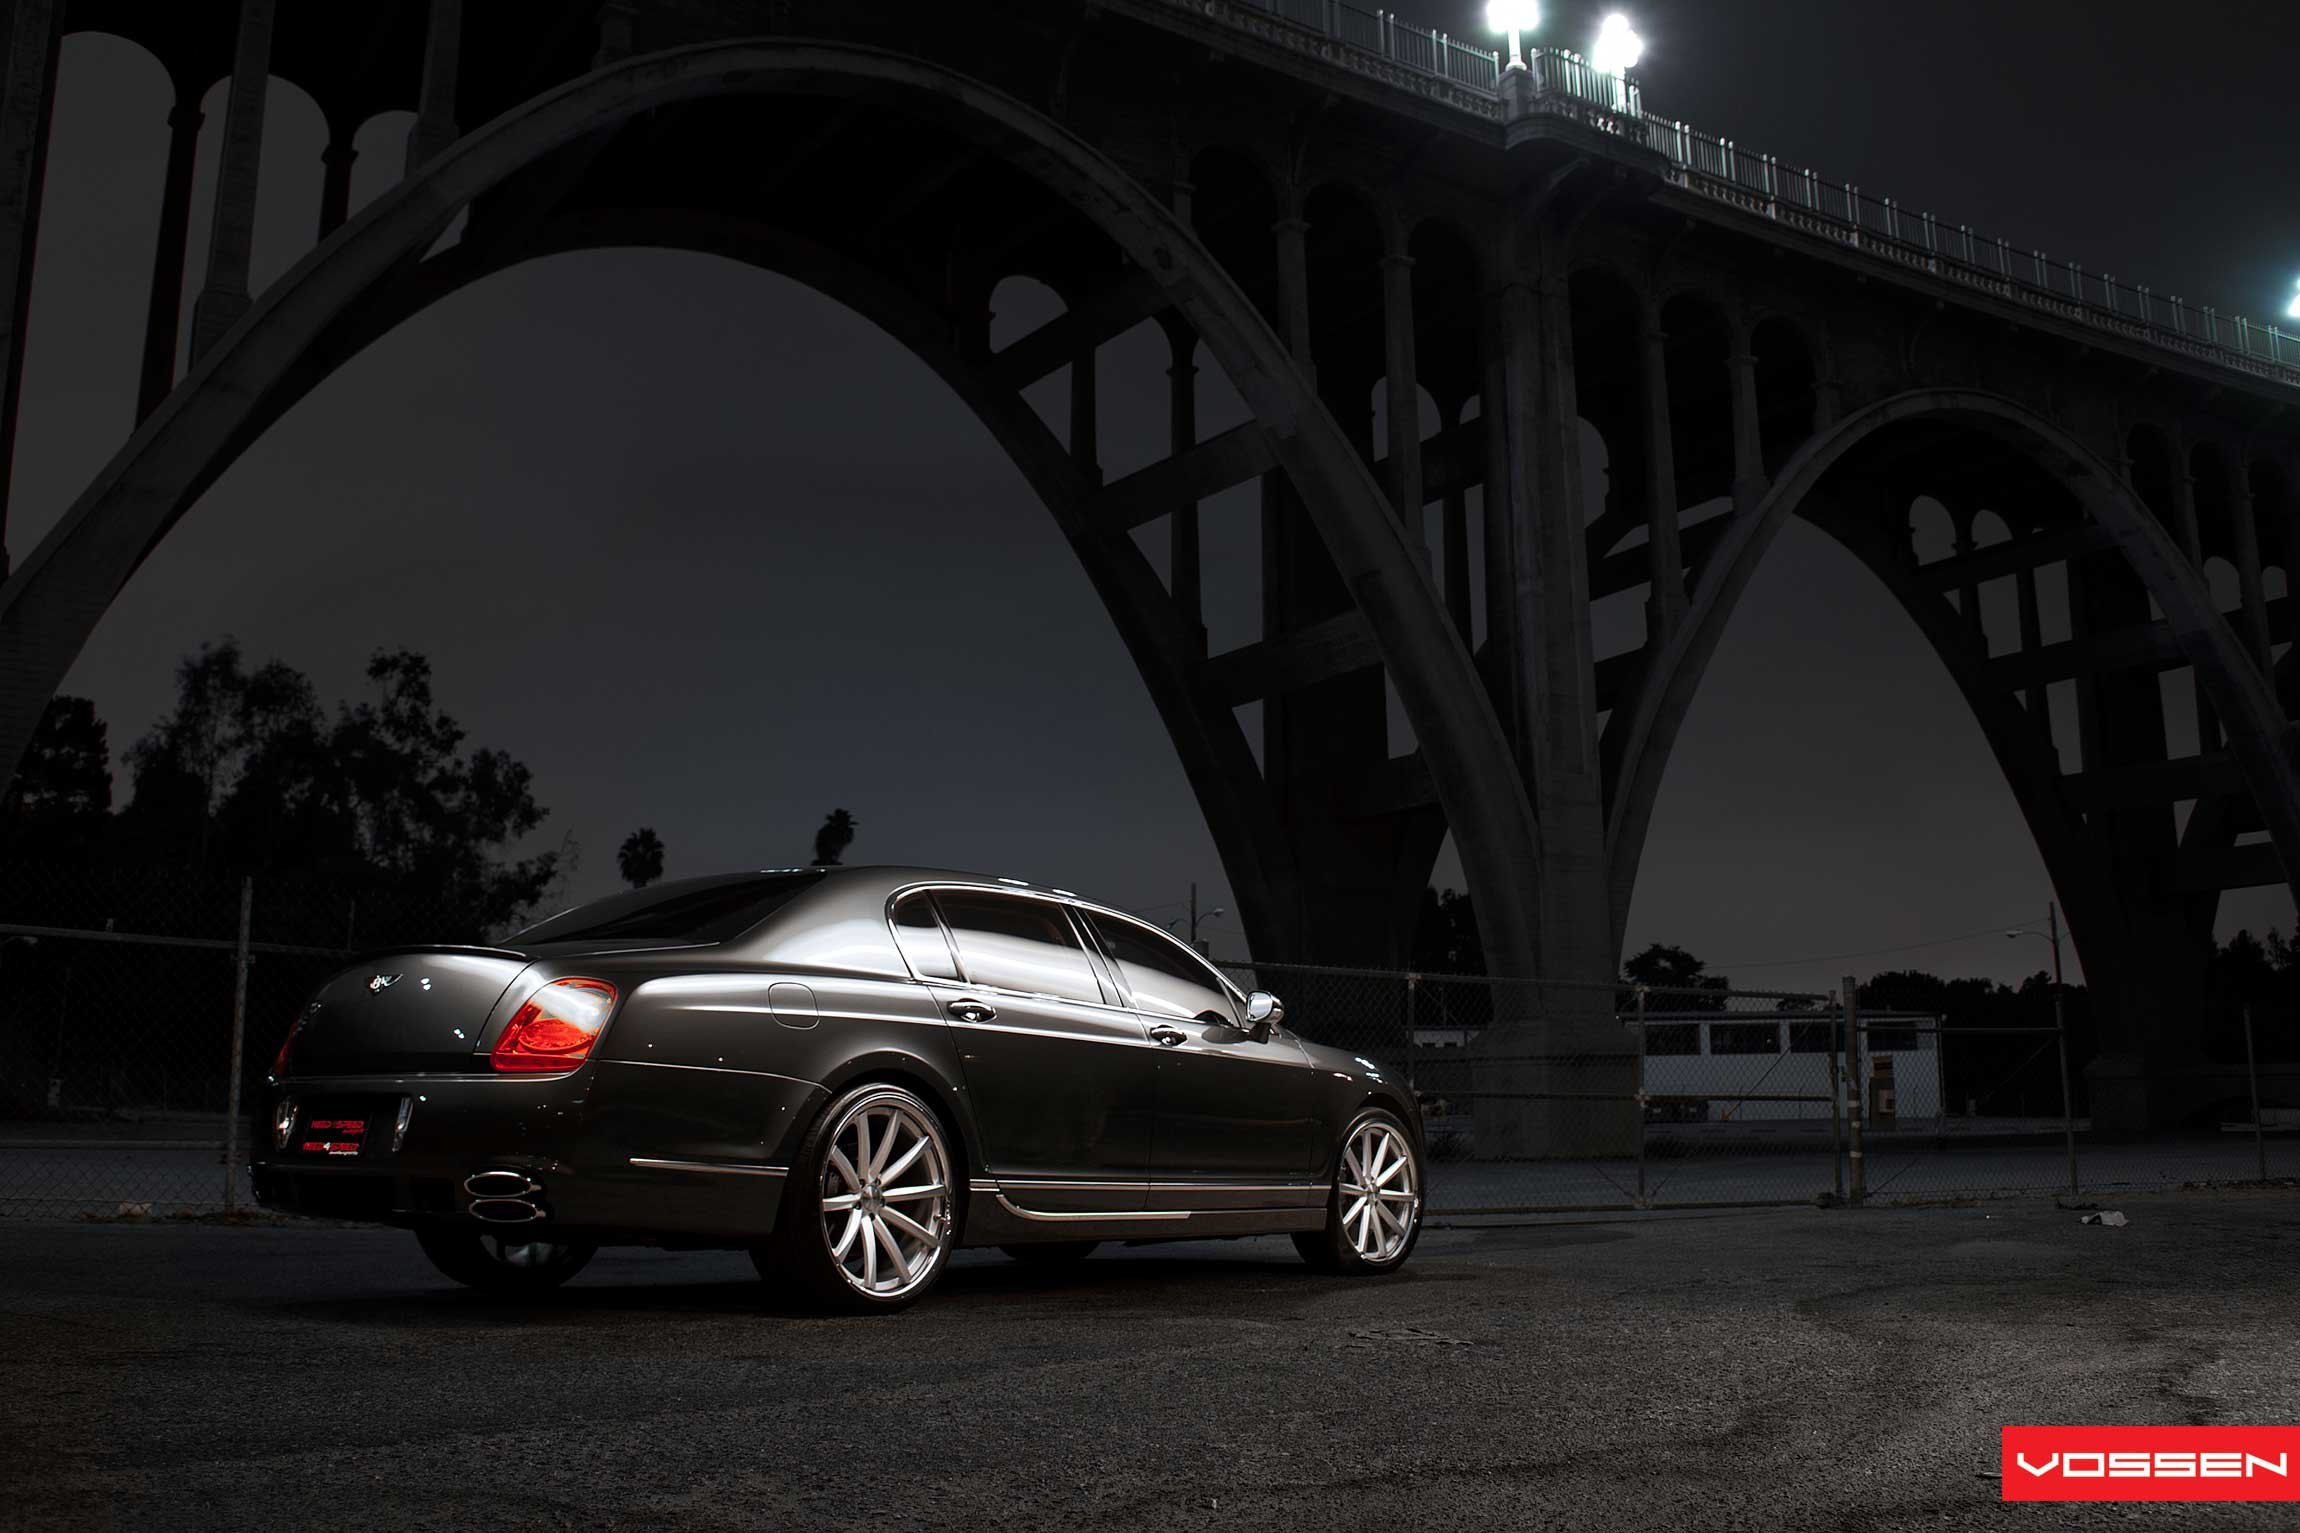 Rear Lip Spoiler on Silver Bentley Flying Spur - Photo by Vossen